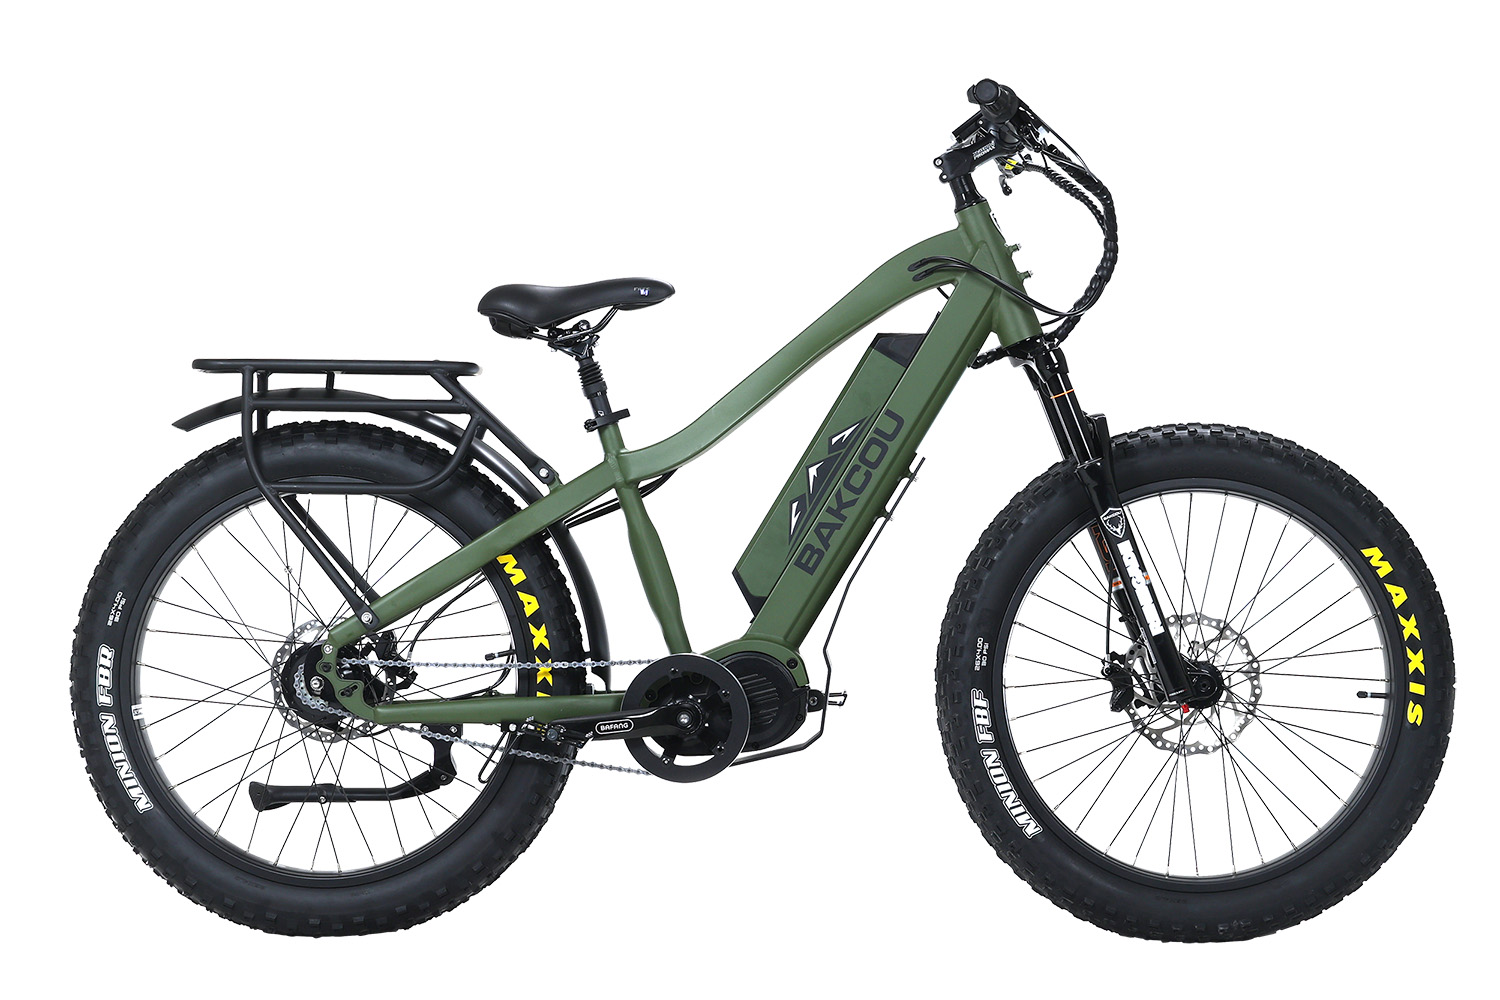 Bakcou E-bikes B-MJ-Mg-B25 Mule Jager Matte Army Green 18" W/Stand Over Height Of 29.50" Frame, Rohloff E-14 (500/14) Sp